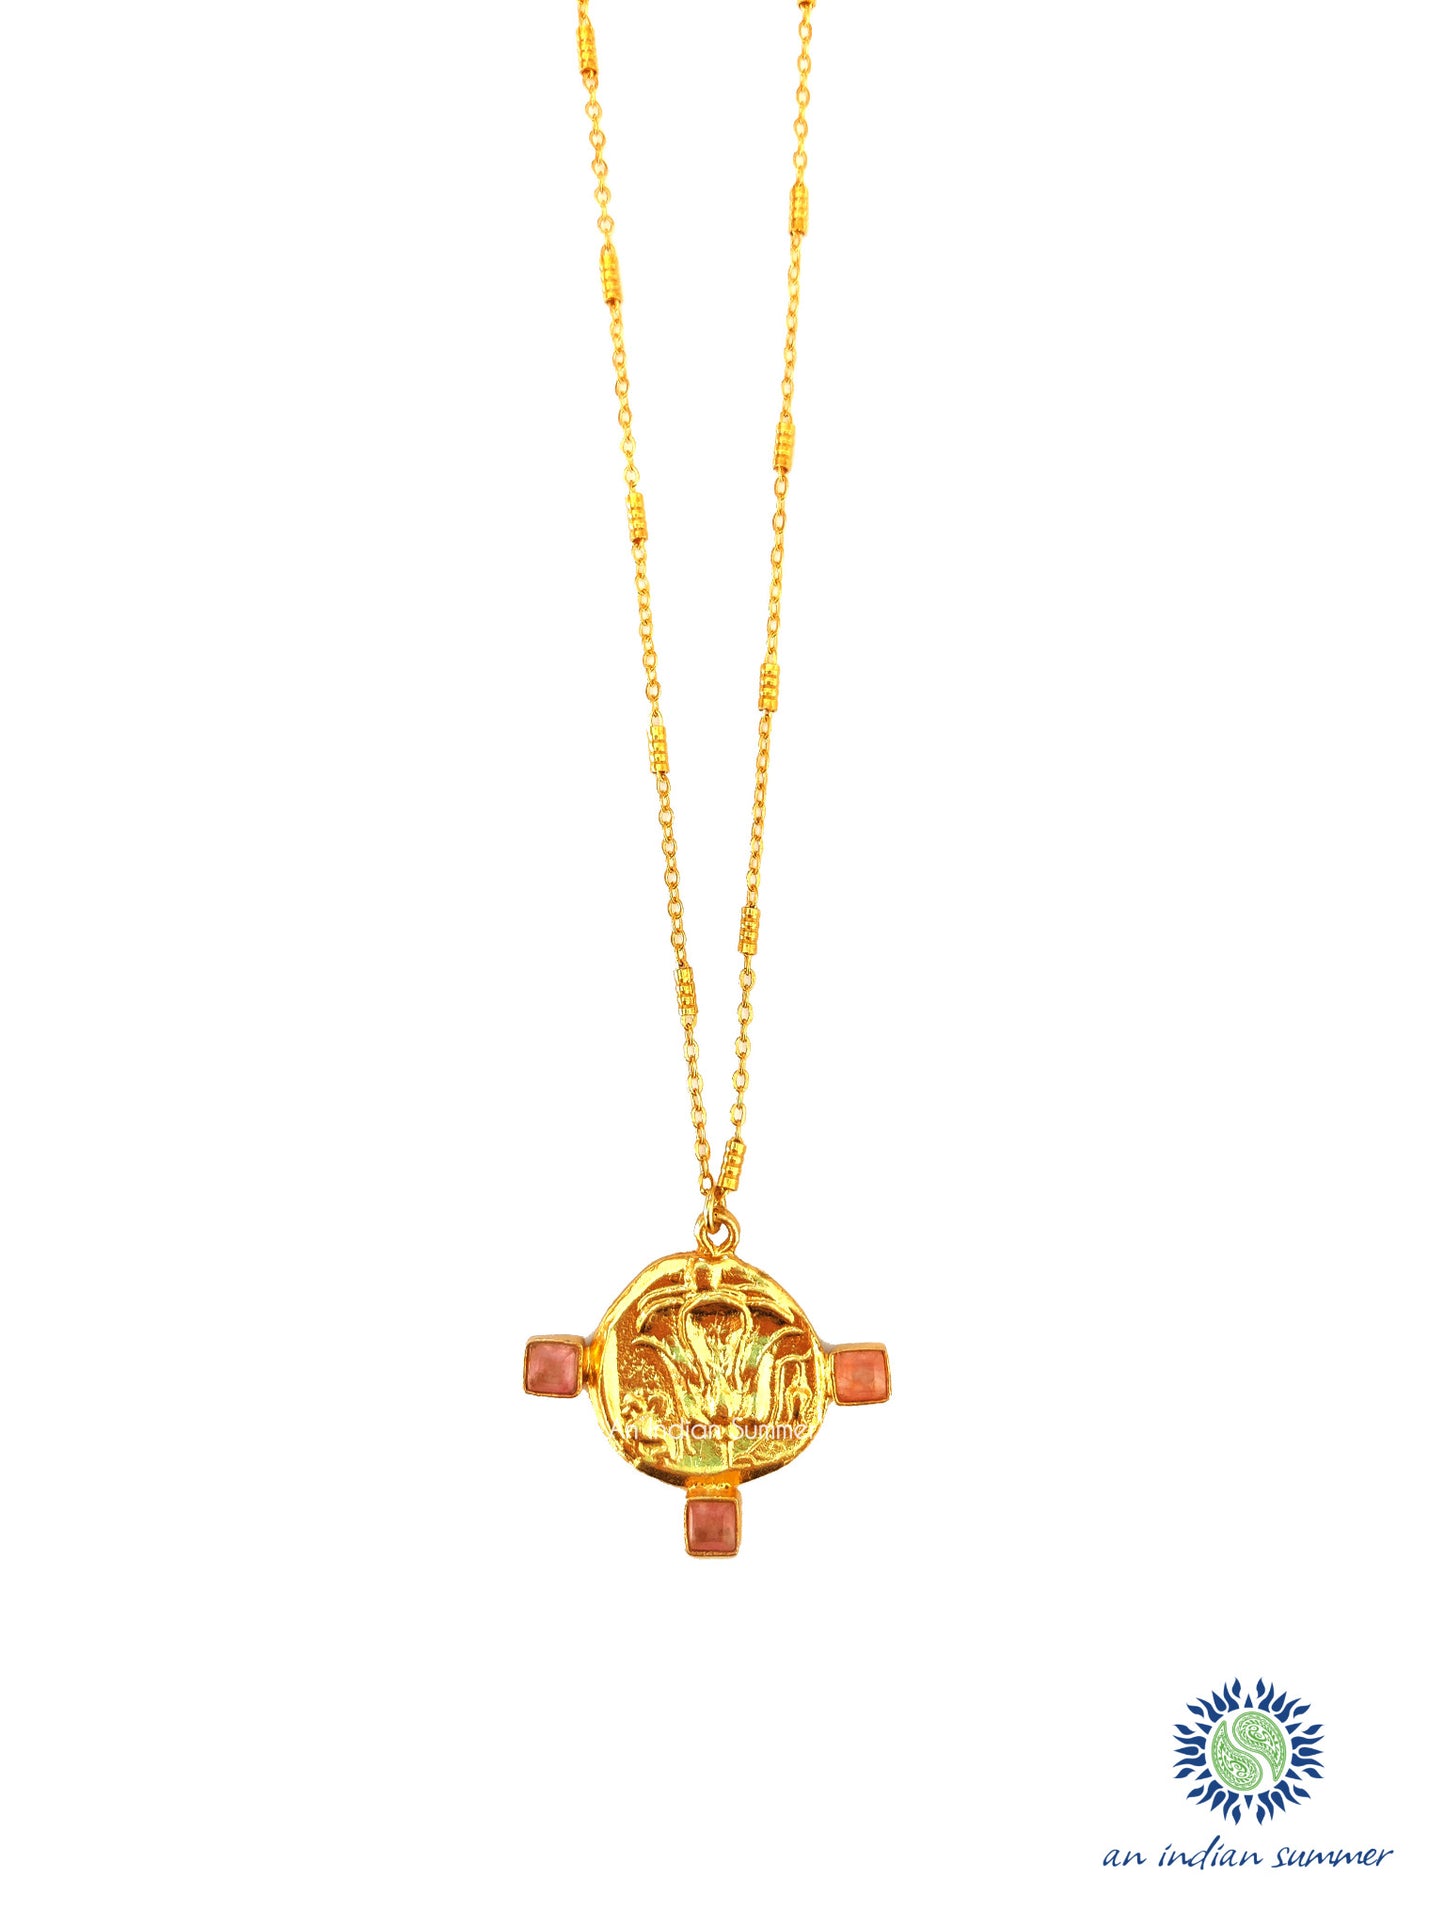 Talisman Medal Necklace - Lotus | Pink Jade | 22 Carat Gold Plated Semi Precious Stones | An Indian Summer | Seasonless Timeless Sustainable Ethical Authentic Artisan Conscious Clothing Lifestyle Brand